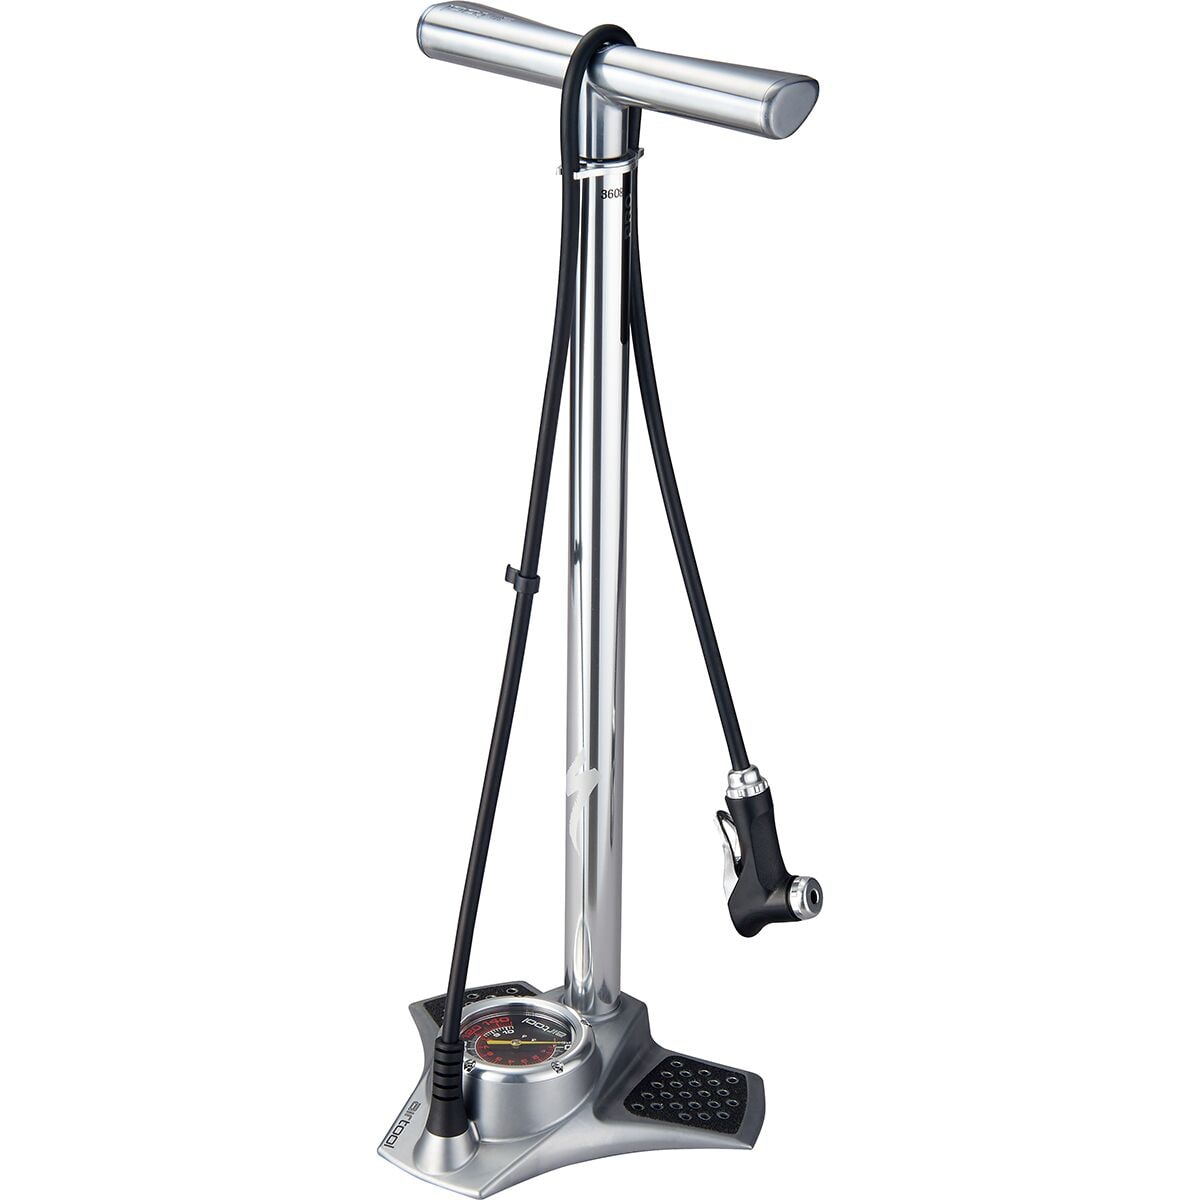 Specialized Air Tool Floor Pump